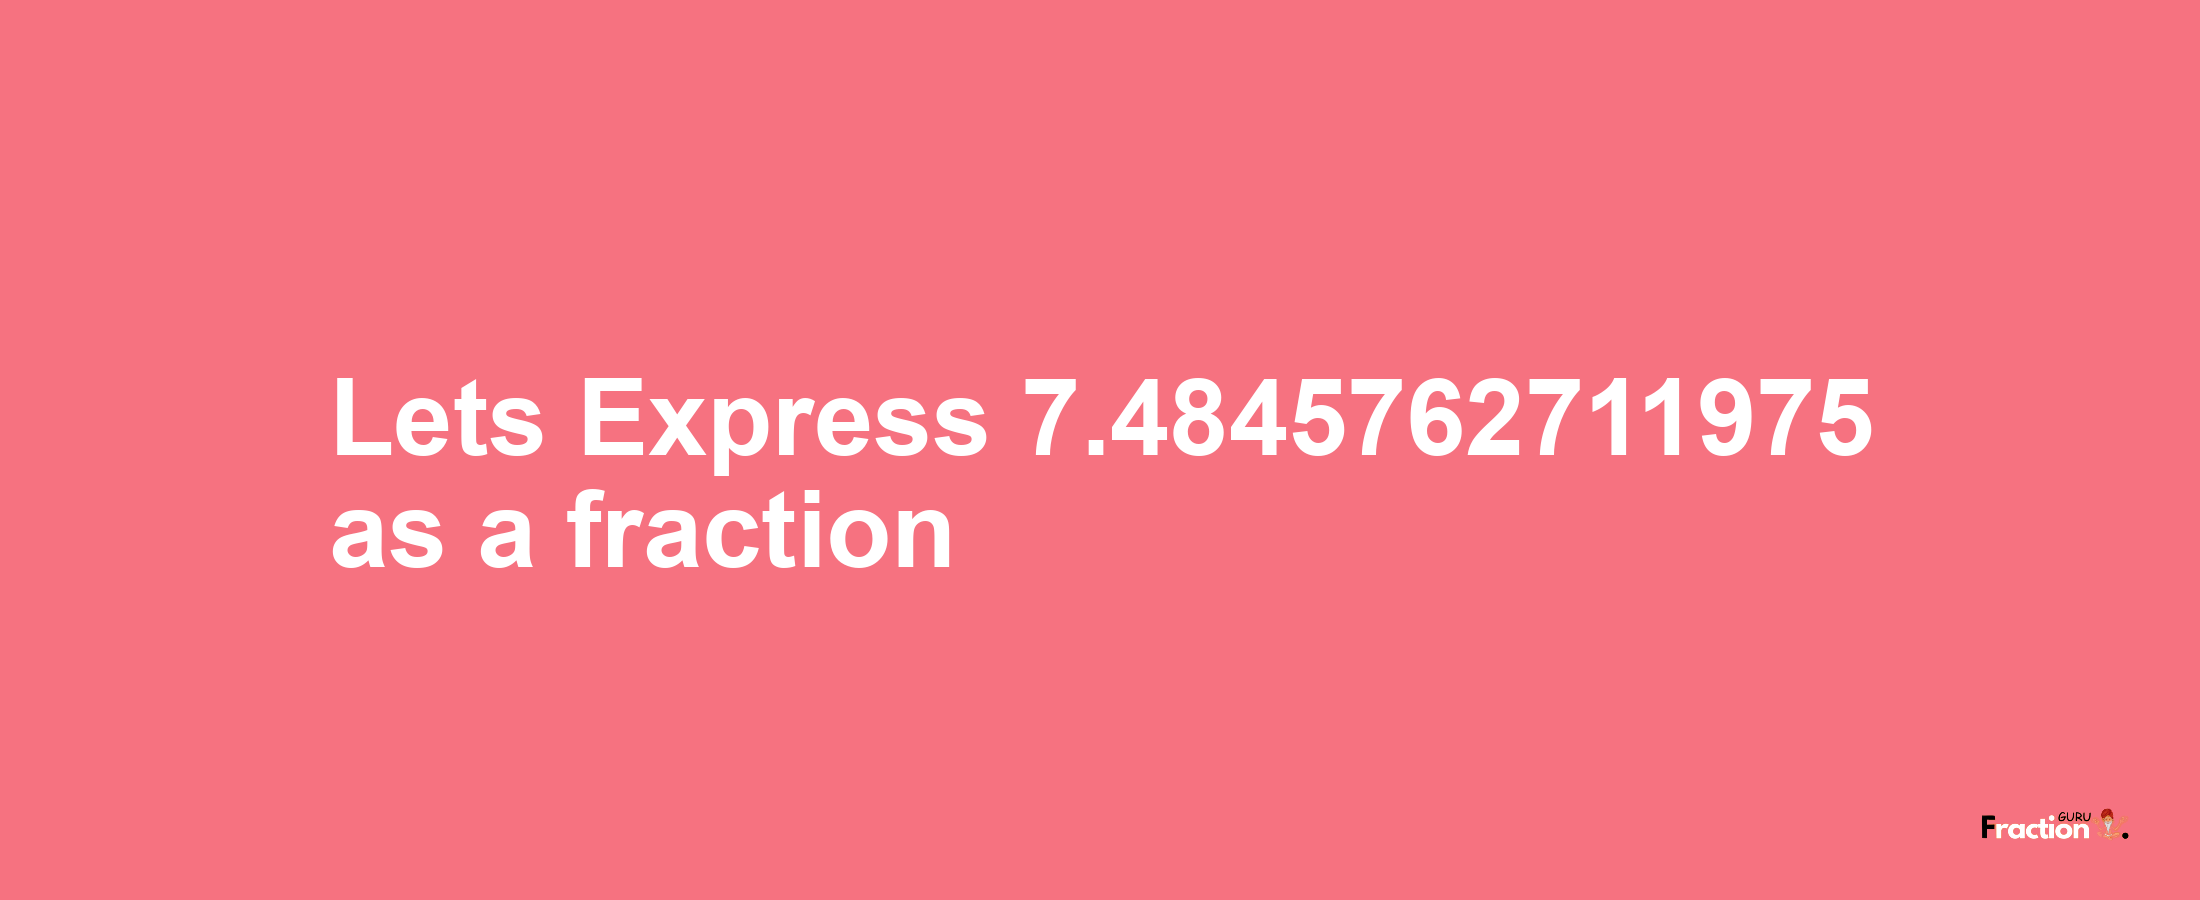 Lets Express 7.4845762711975 as afraction